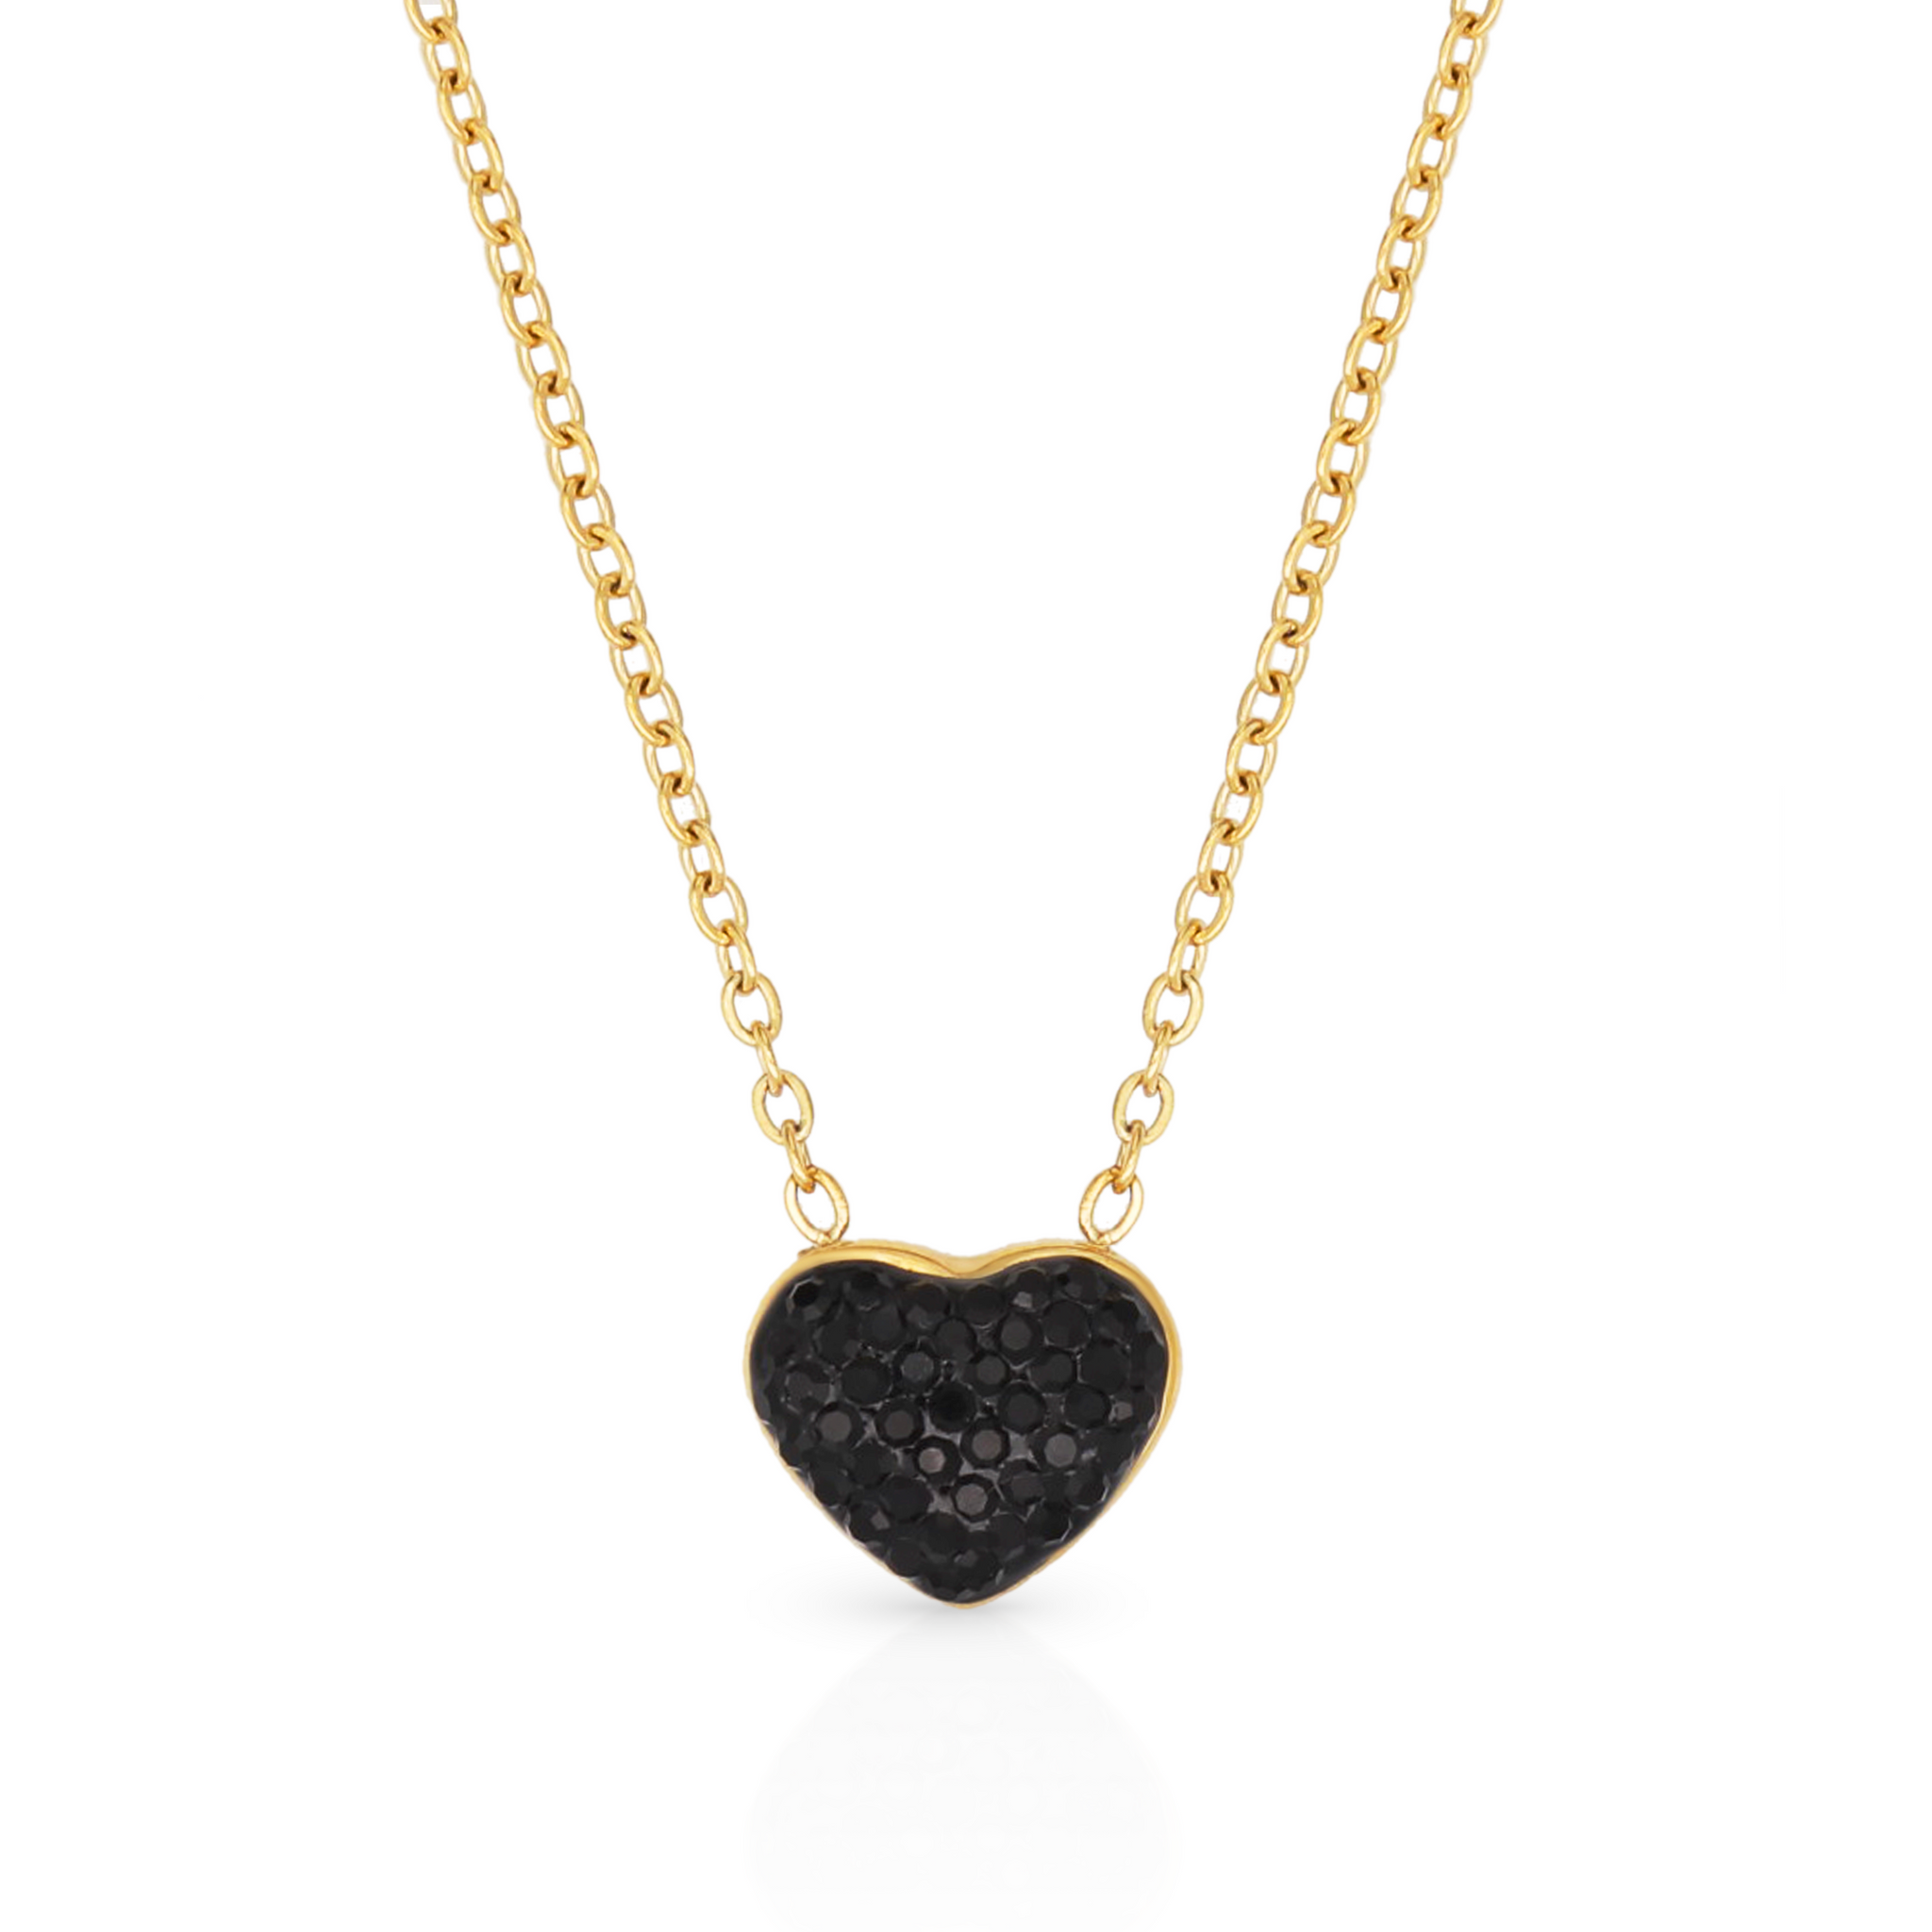 Change of Heart Gold Necklace